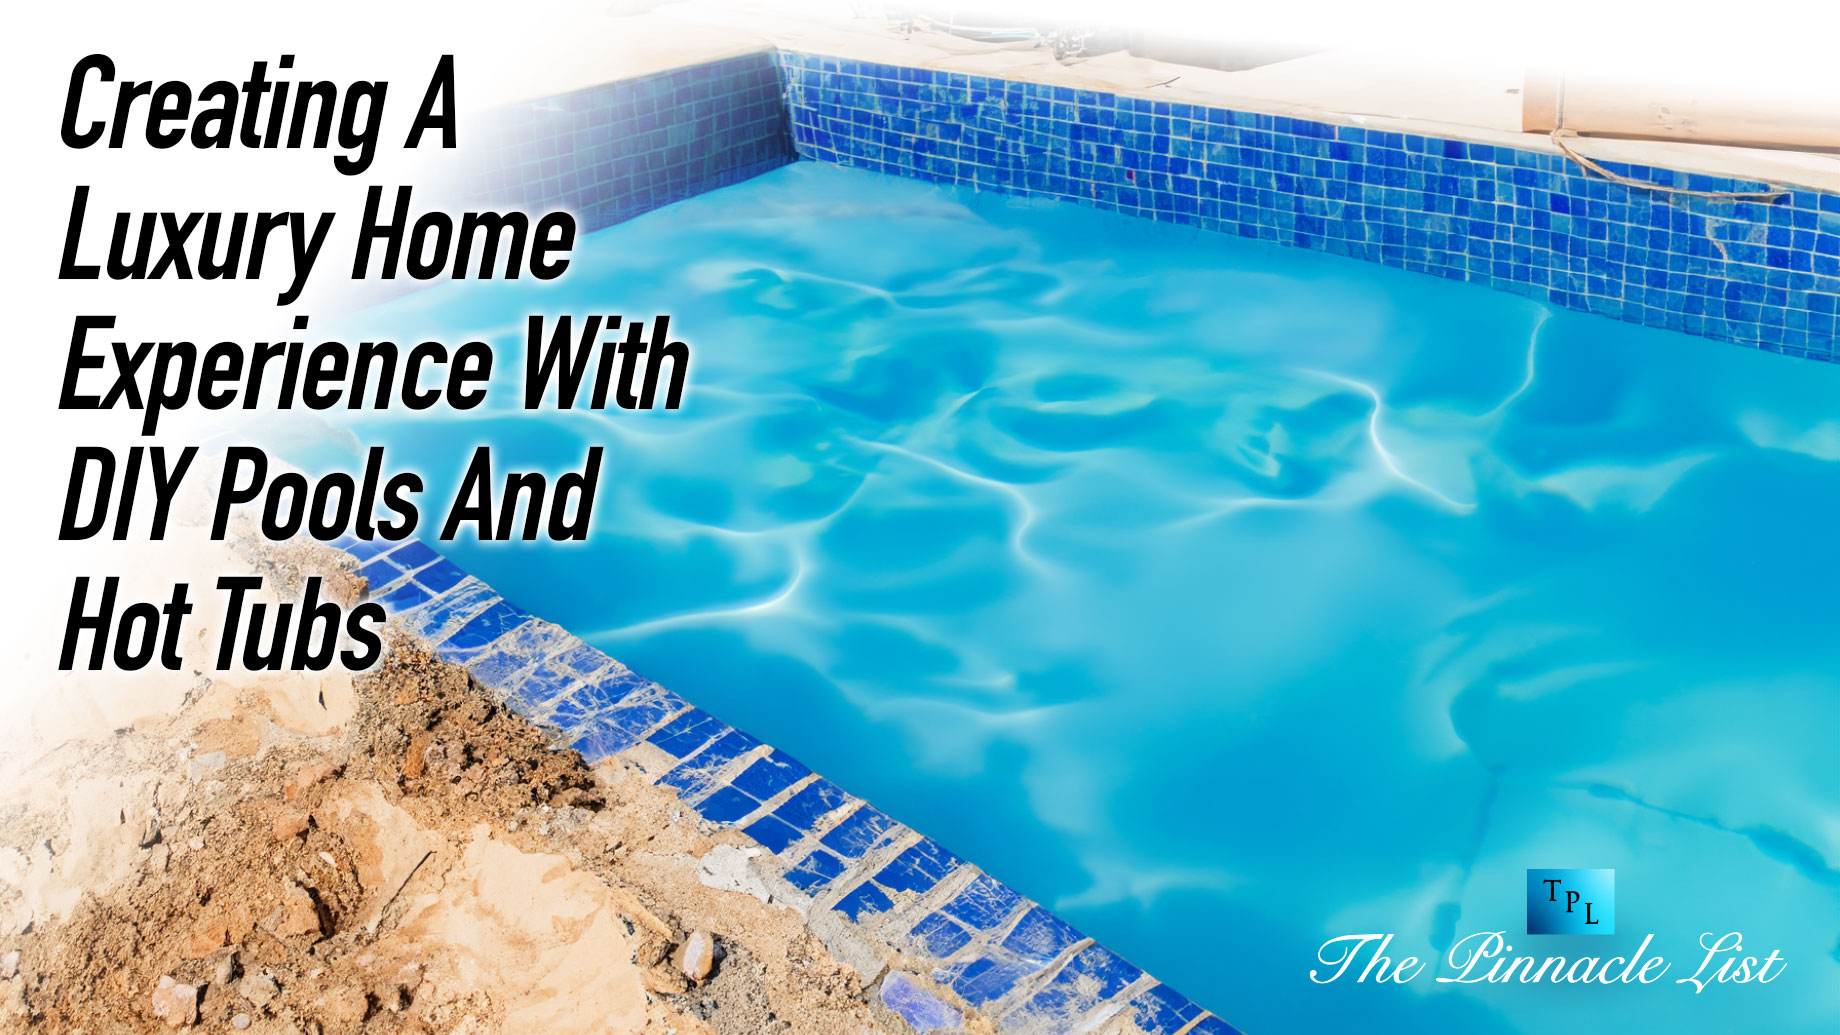 Creating A Luxury Home Experience With DIY Pools And Hot Tubs